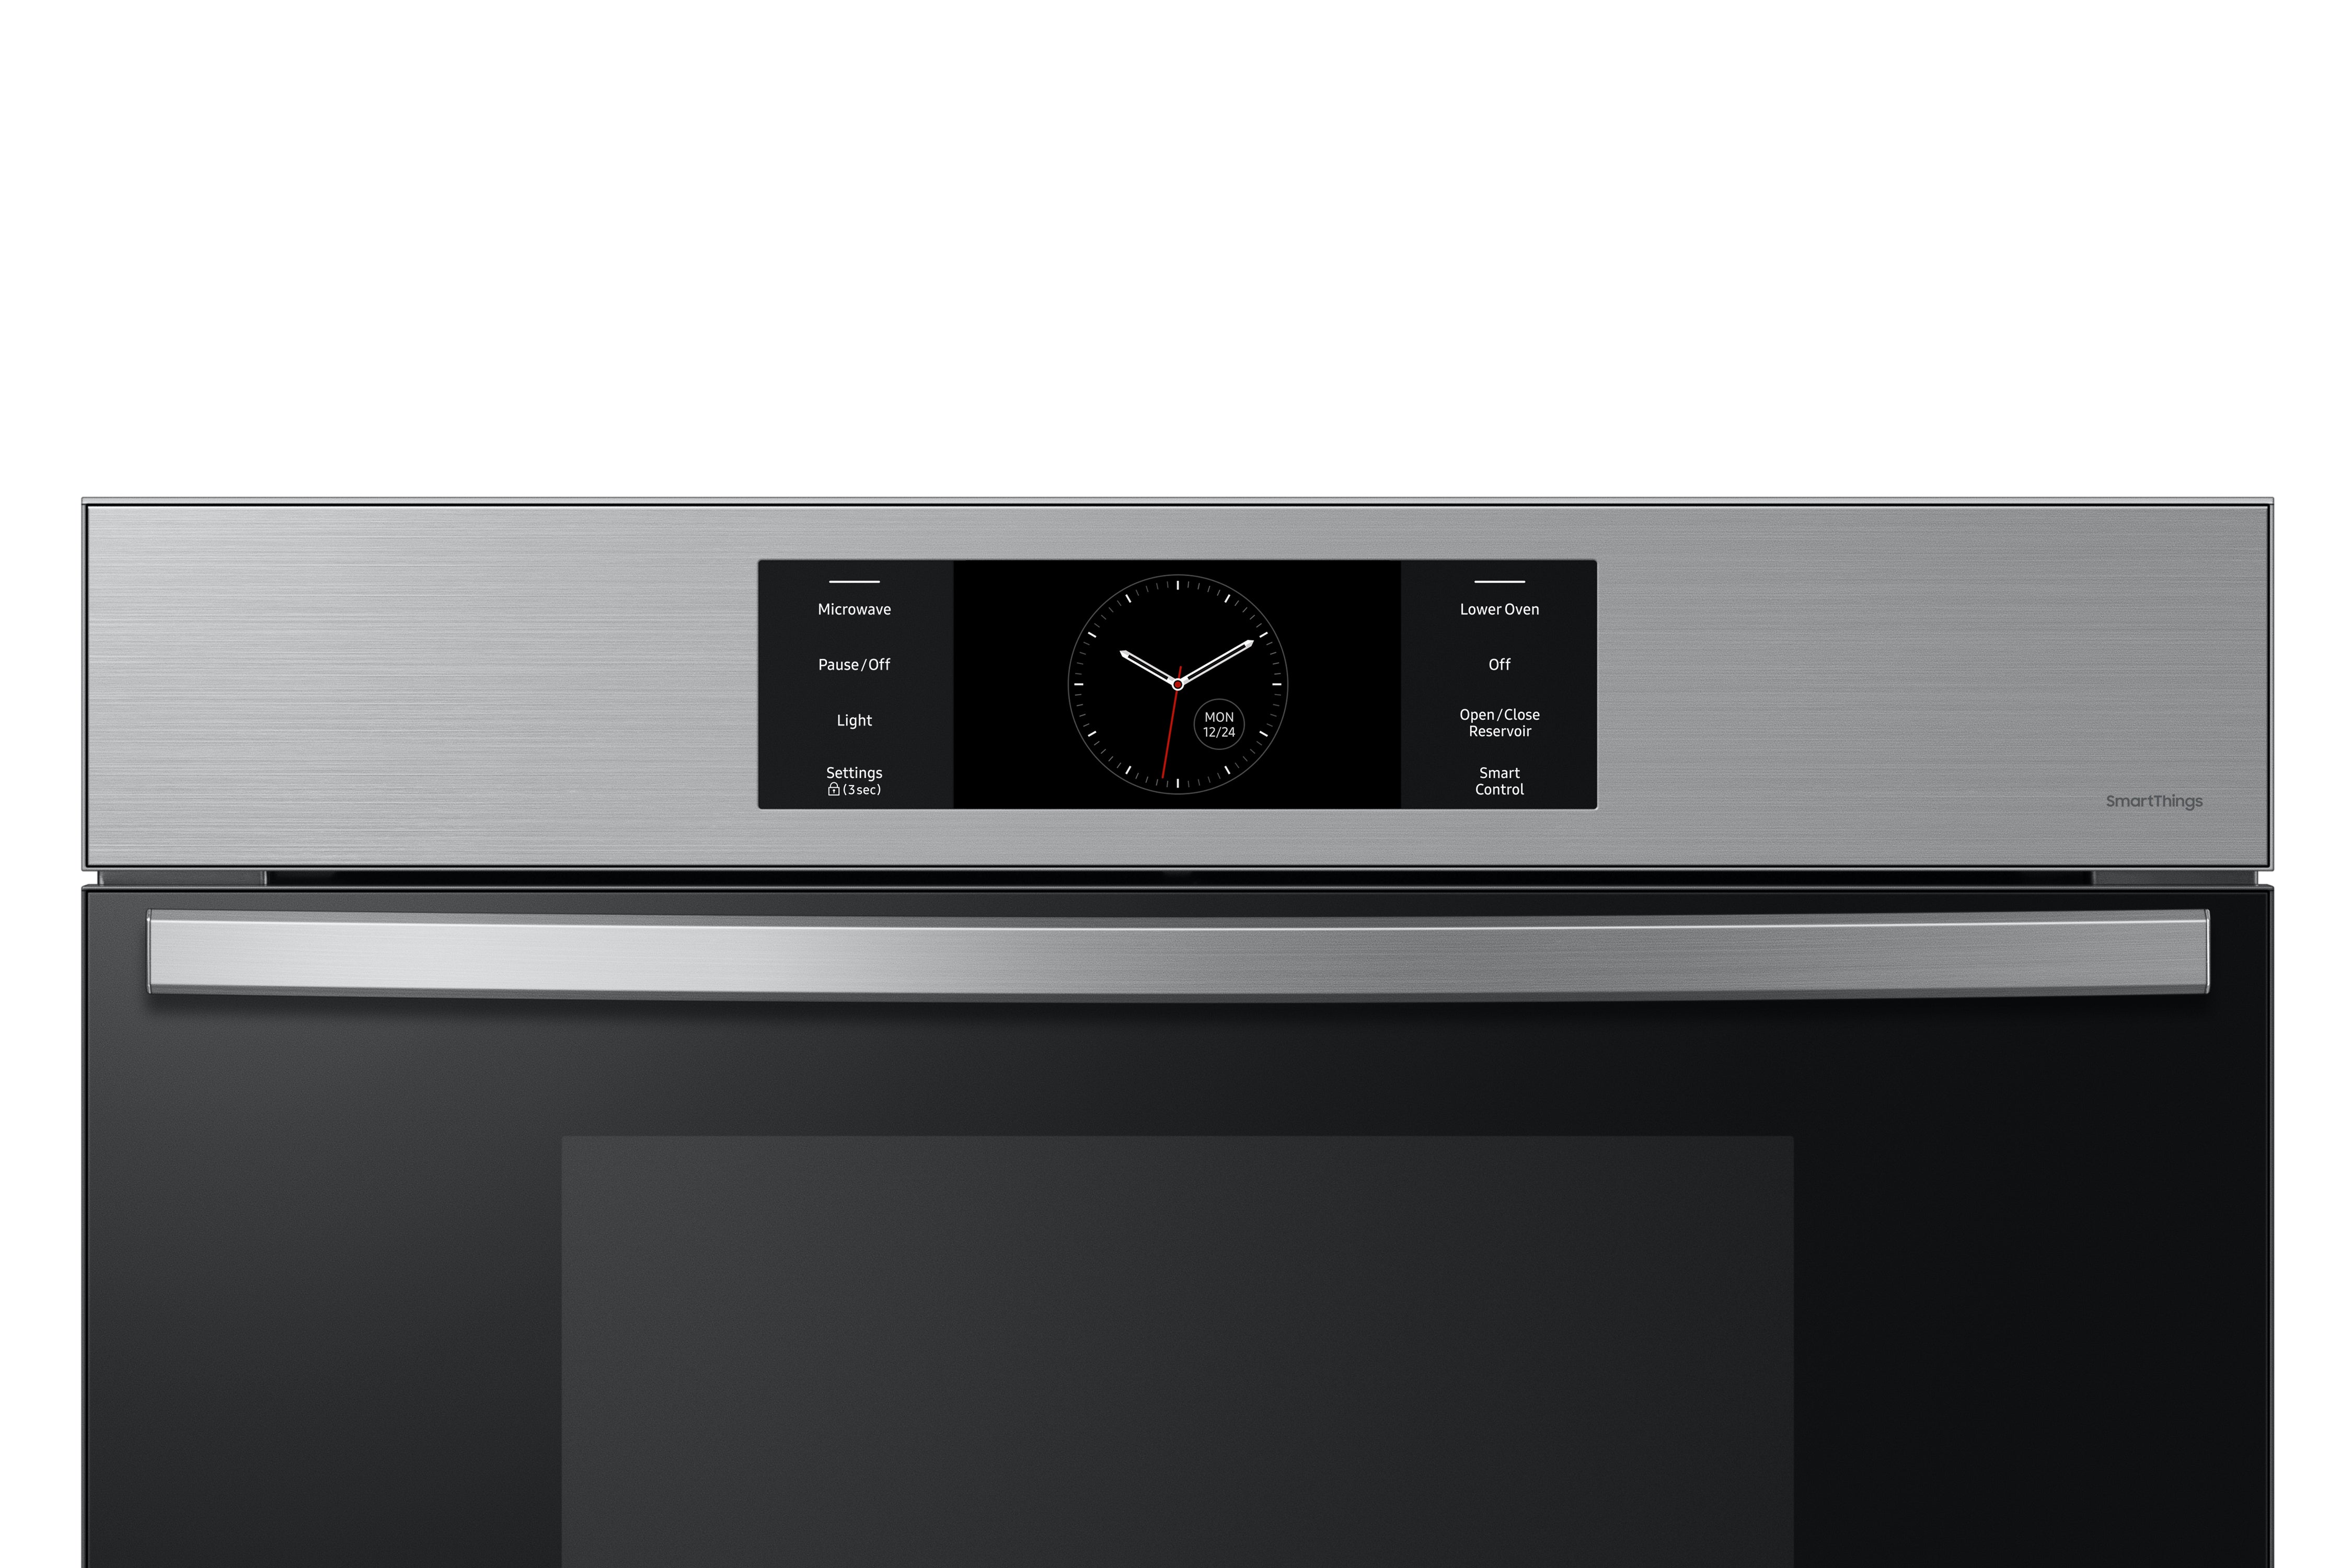 Samsung - 5.1 cu. ft Combination Wall Oven in Stainless - NQ70CG700DSRAA